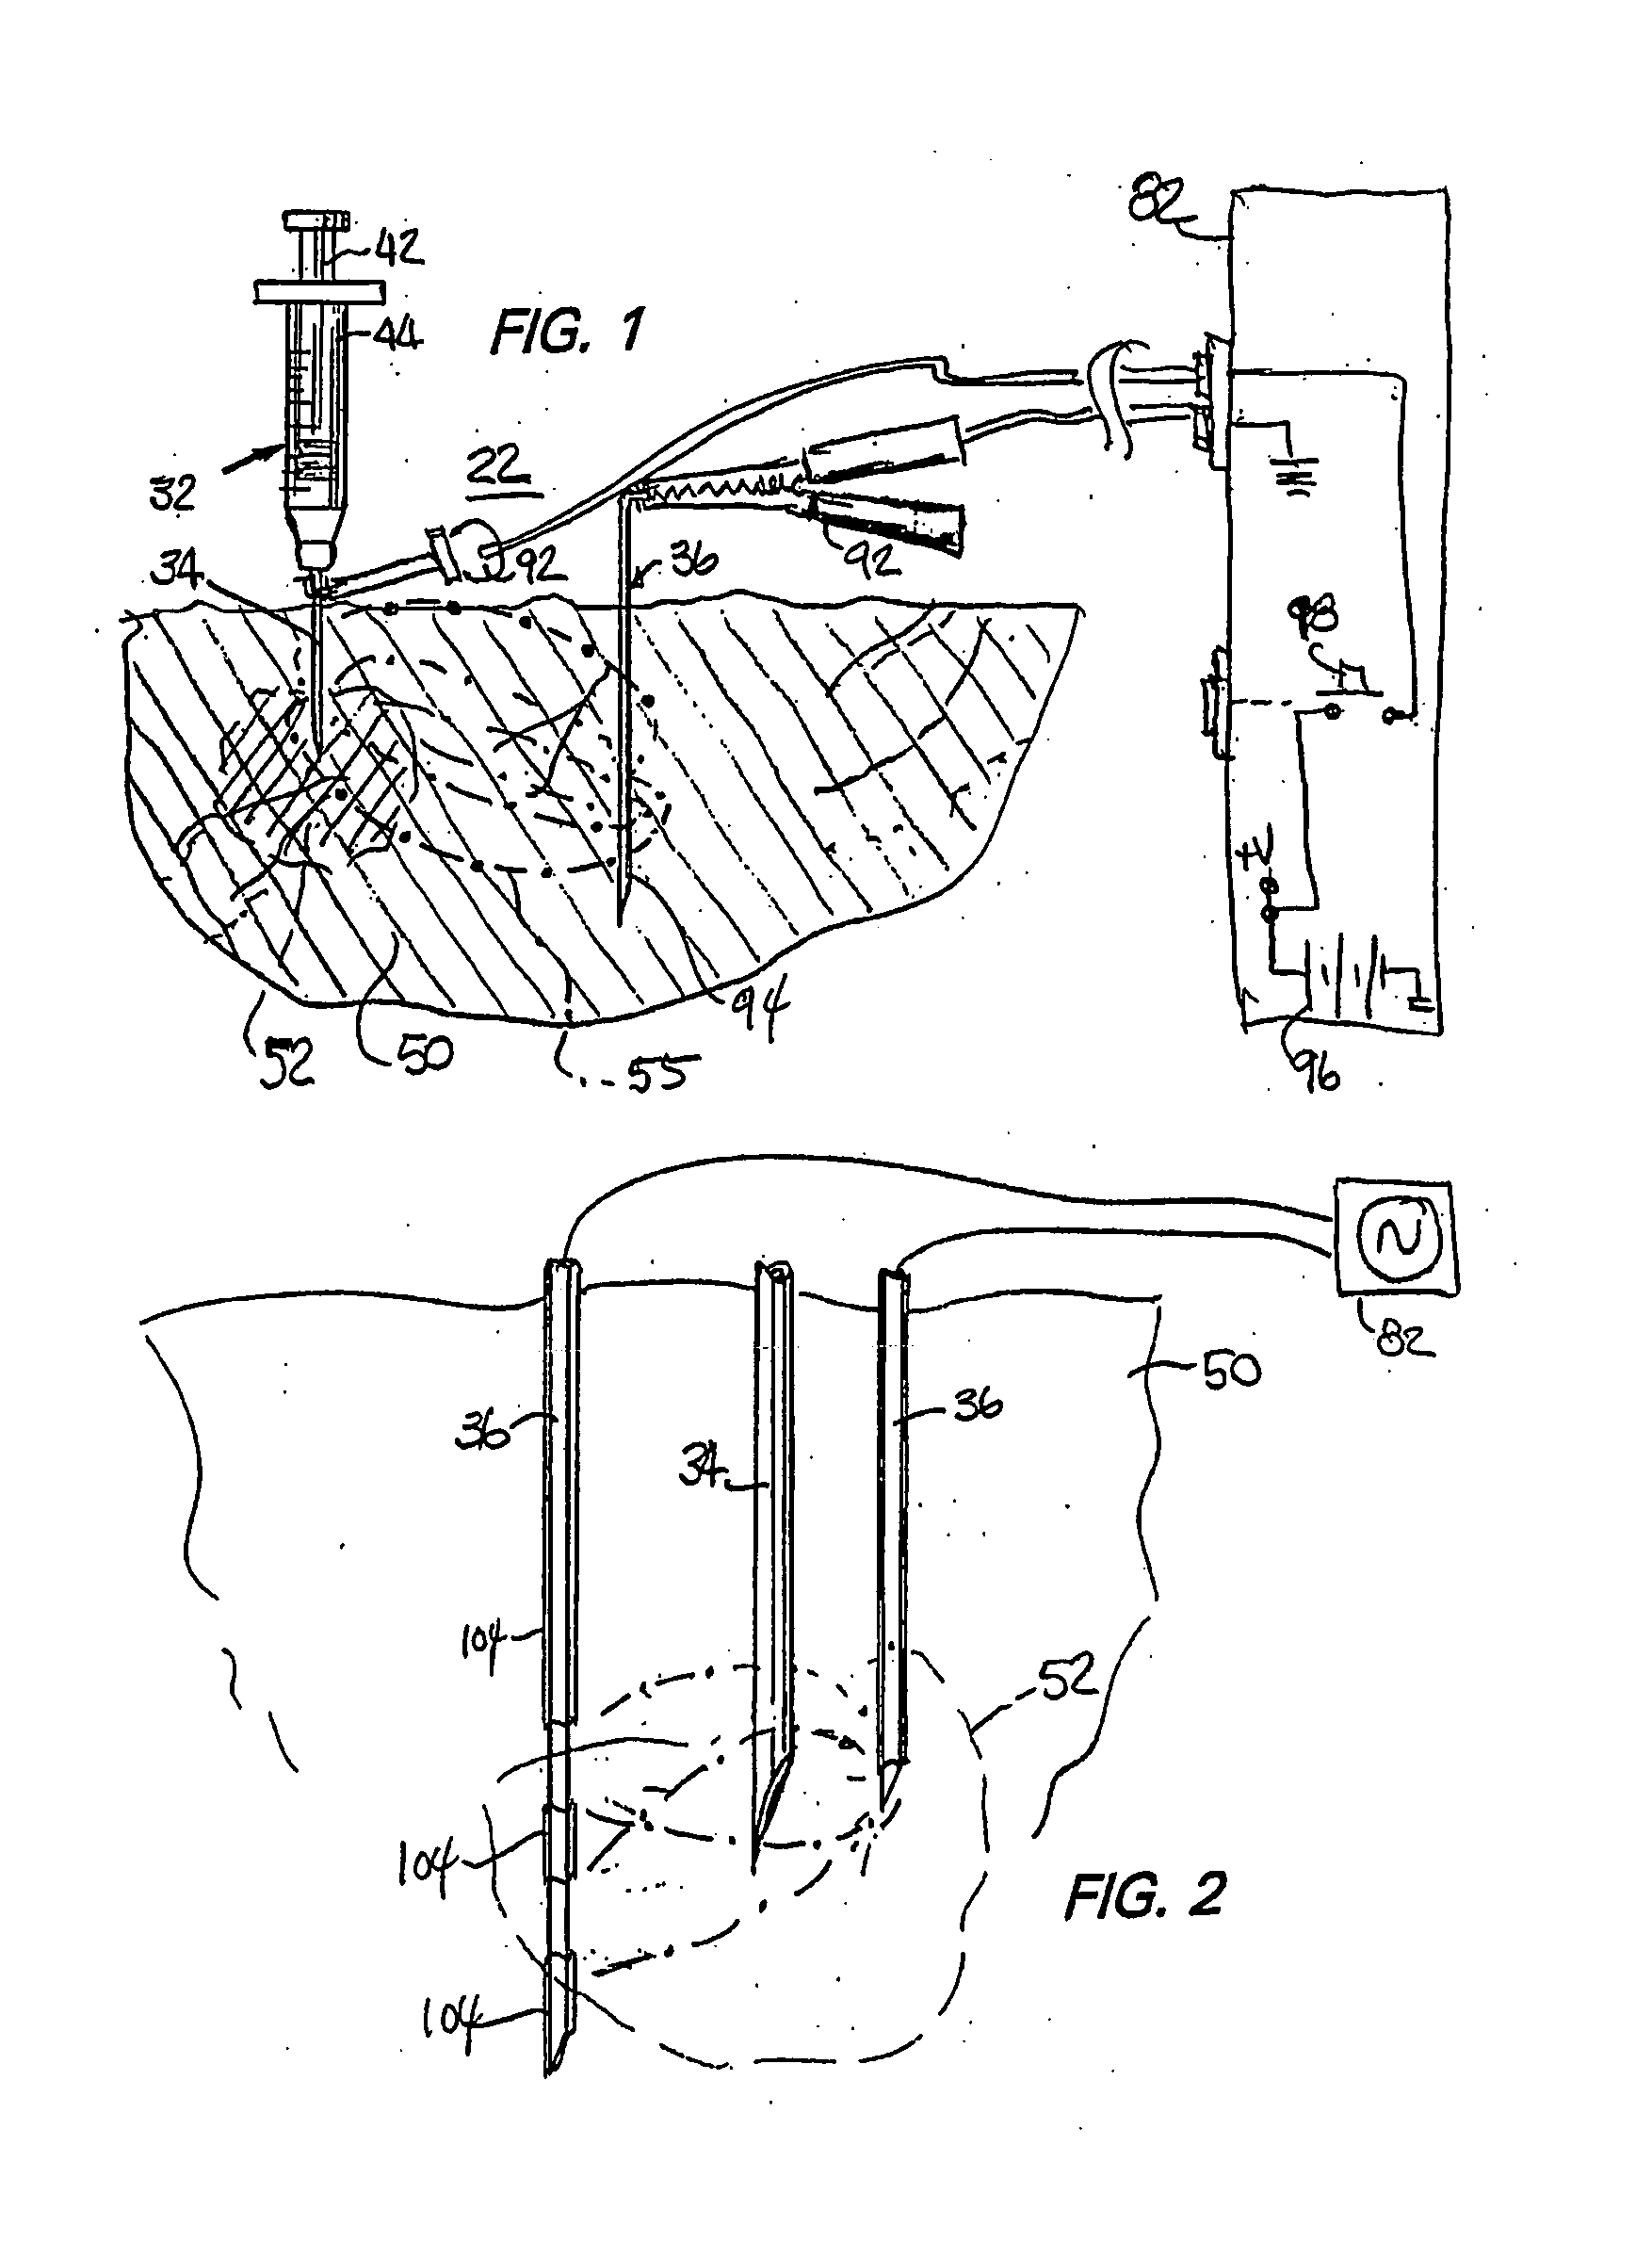 Clinical syringe with electrical stimulation aspects